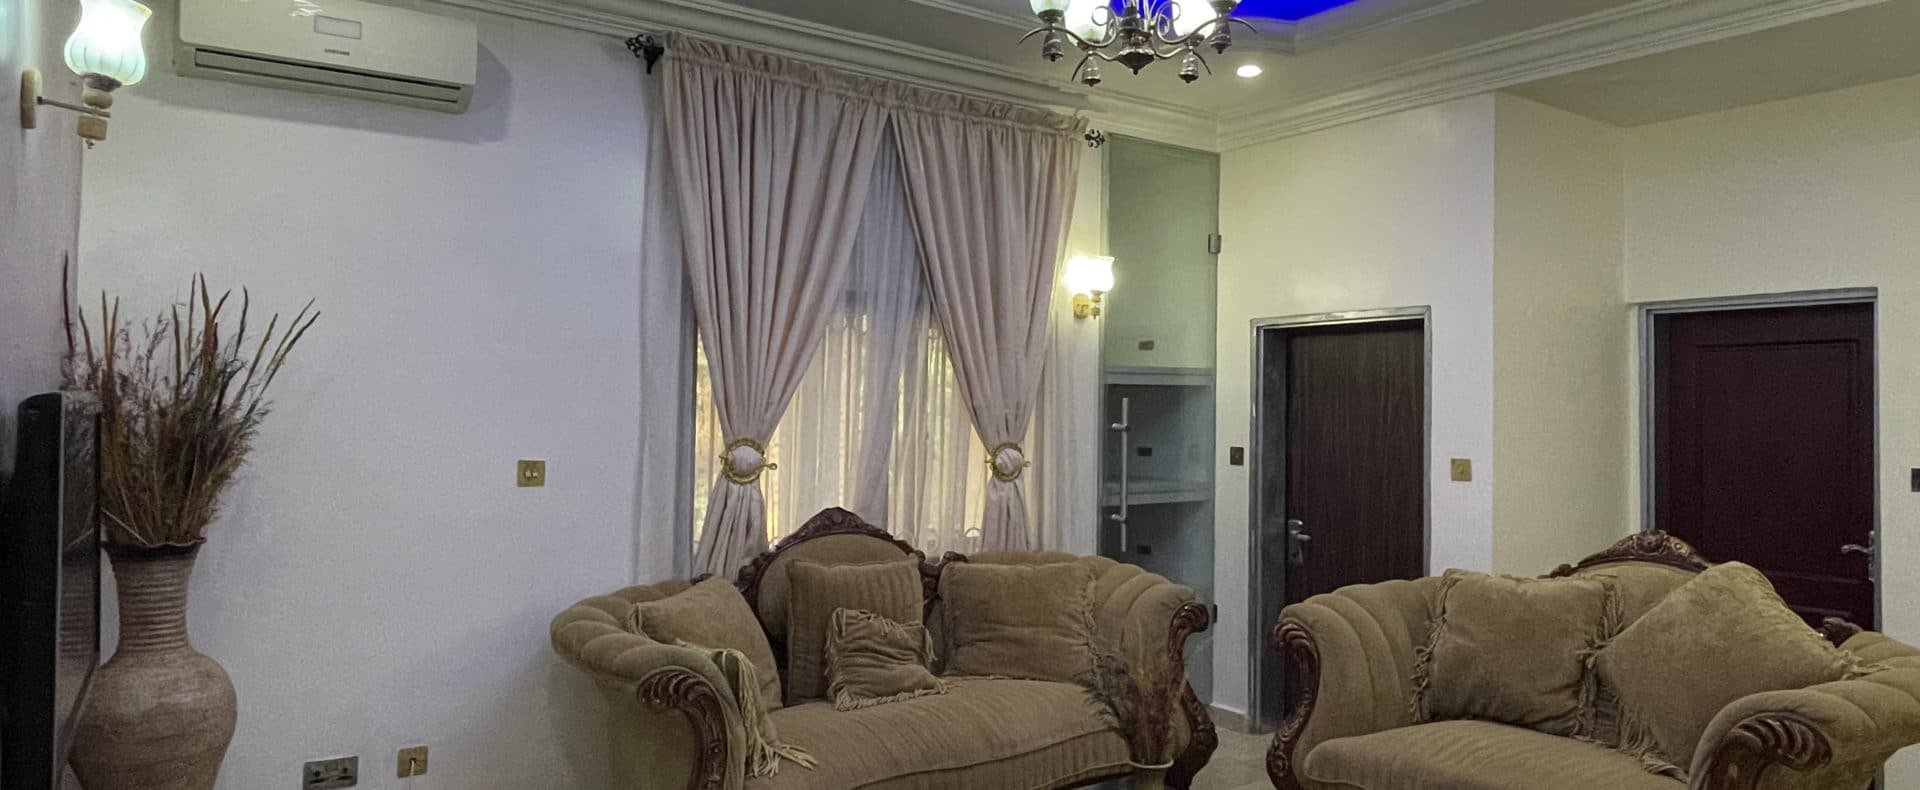 House 8 Apartment Short Let In Abuja Nigeria